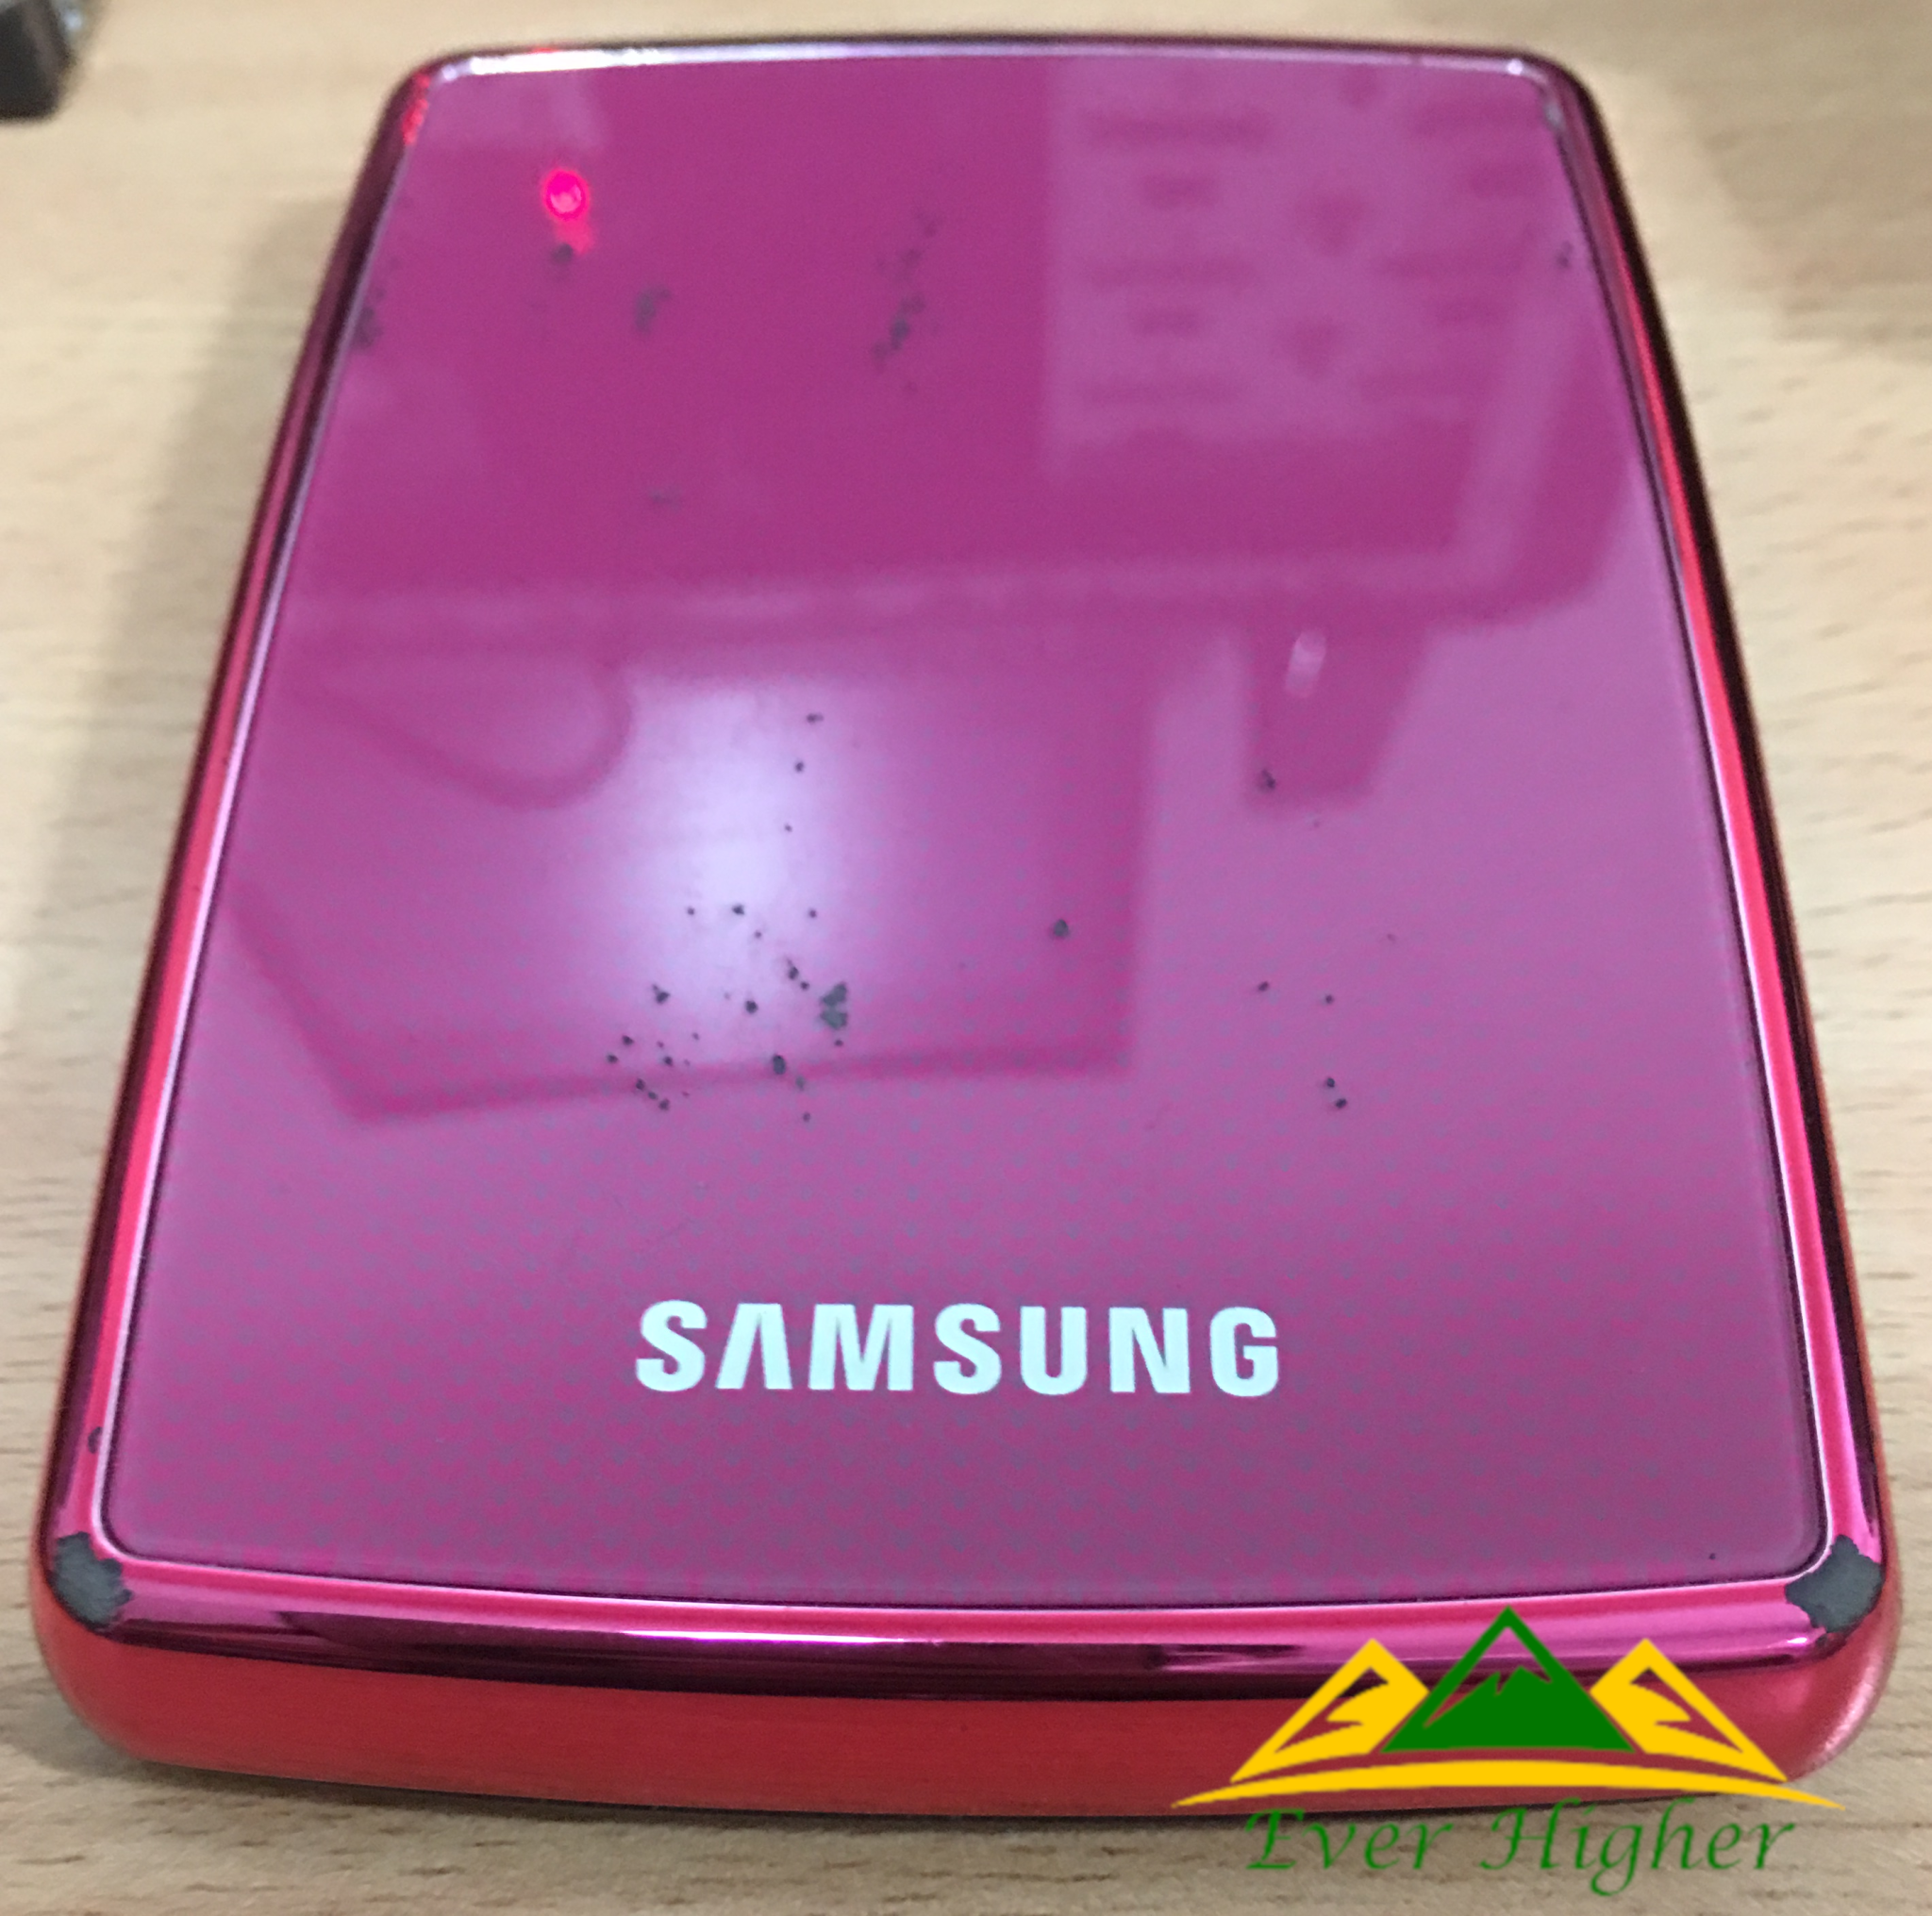 Samsung 2.5 Inch External Hard Disk Data Recovery Service In Singapore